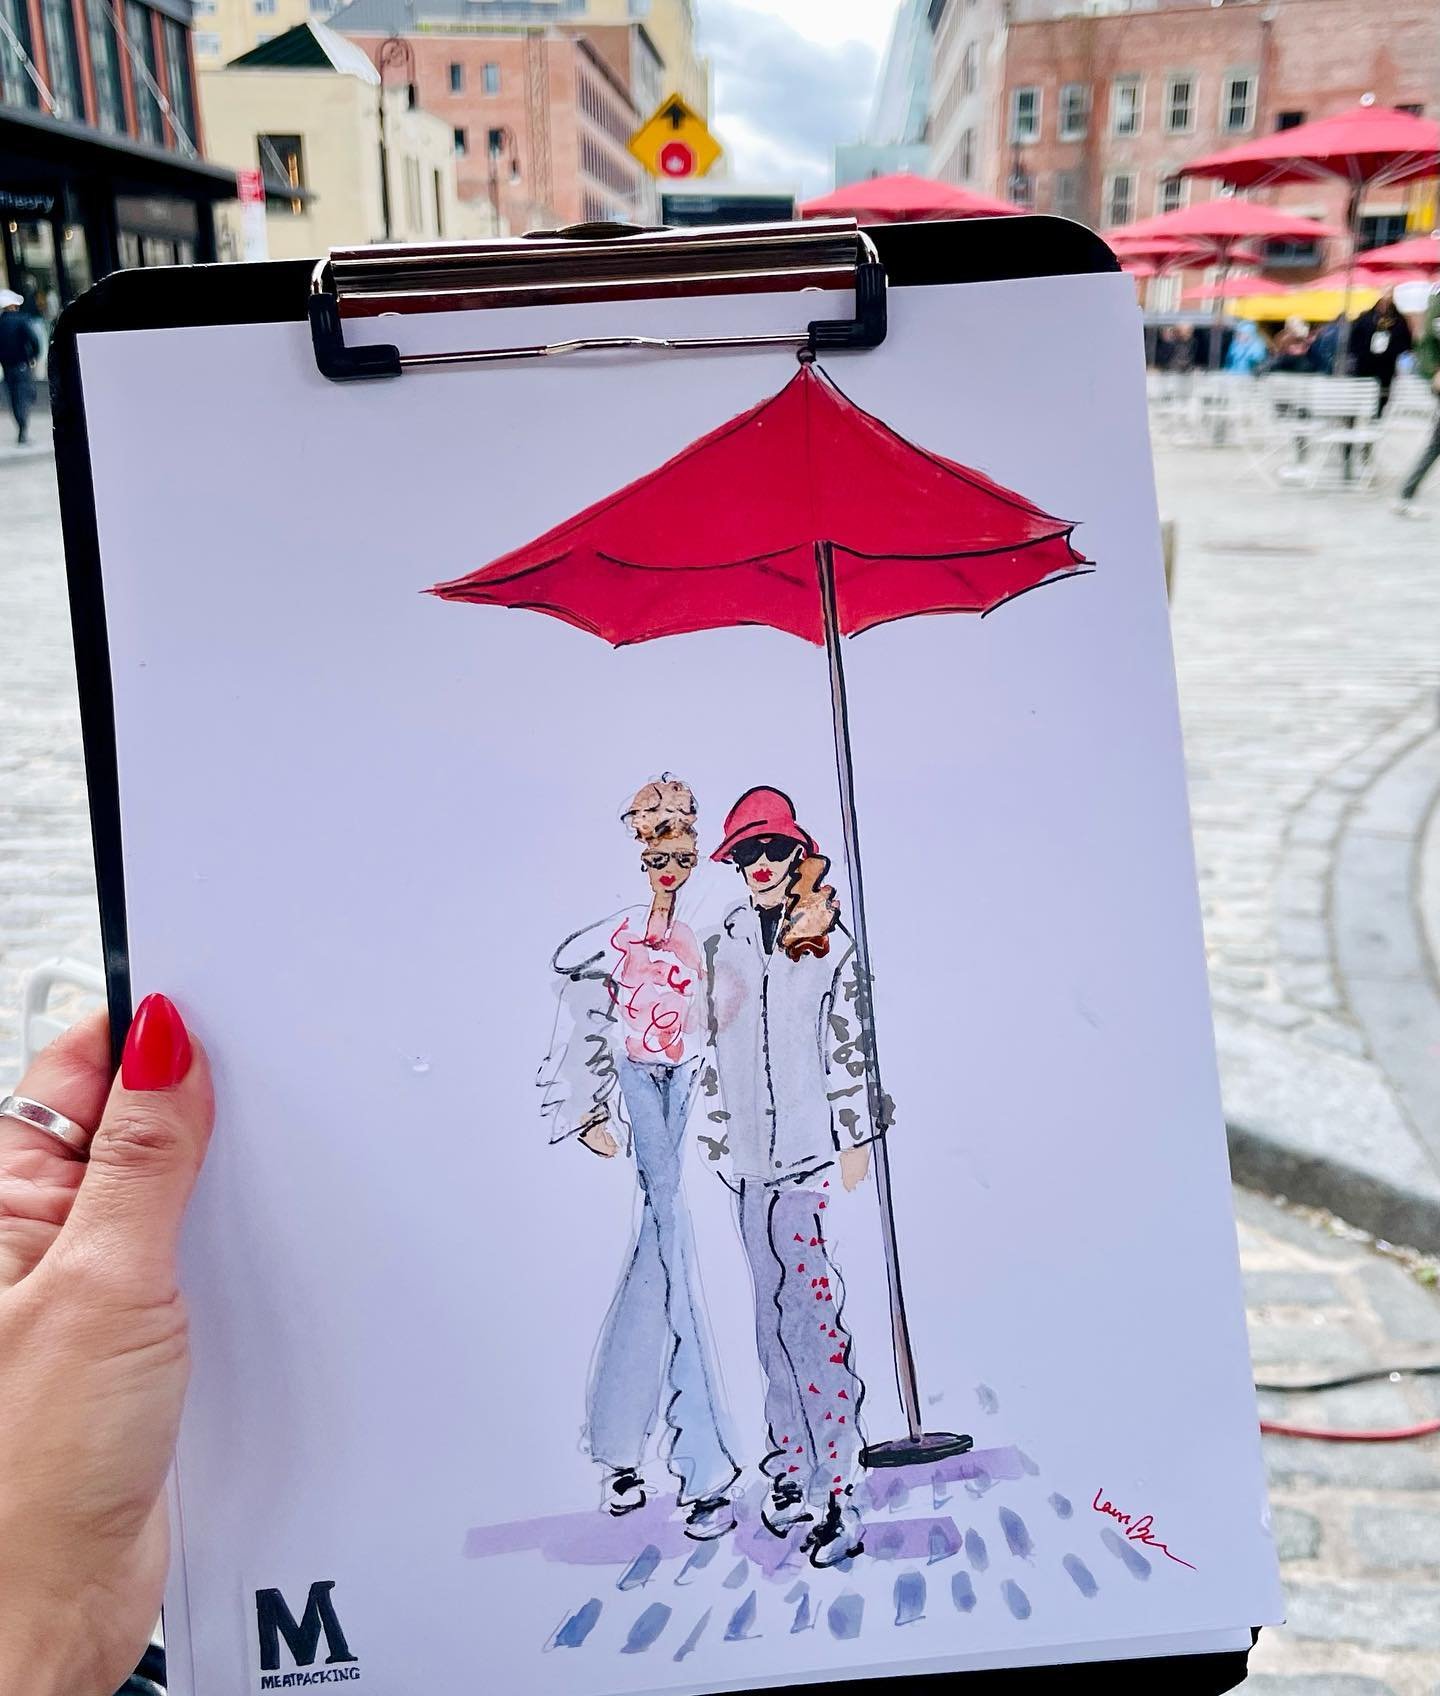 Honored to sketch at Meatpacking&rsquo;s Return of the Red Umbrellas today. A music-filled, windswept community event - always a fun time @meatpackingny 

Got to catch my red umbrella art affixed on a table in Gansevoort Plaza, what a feeling

Thank 